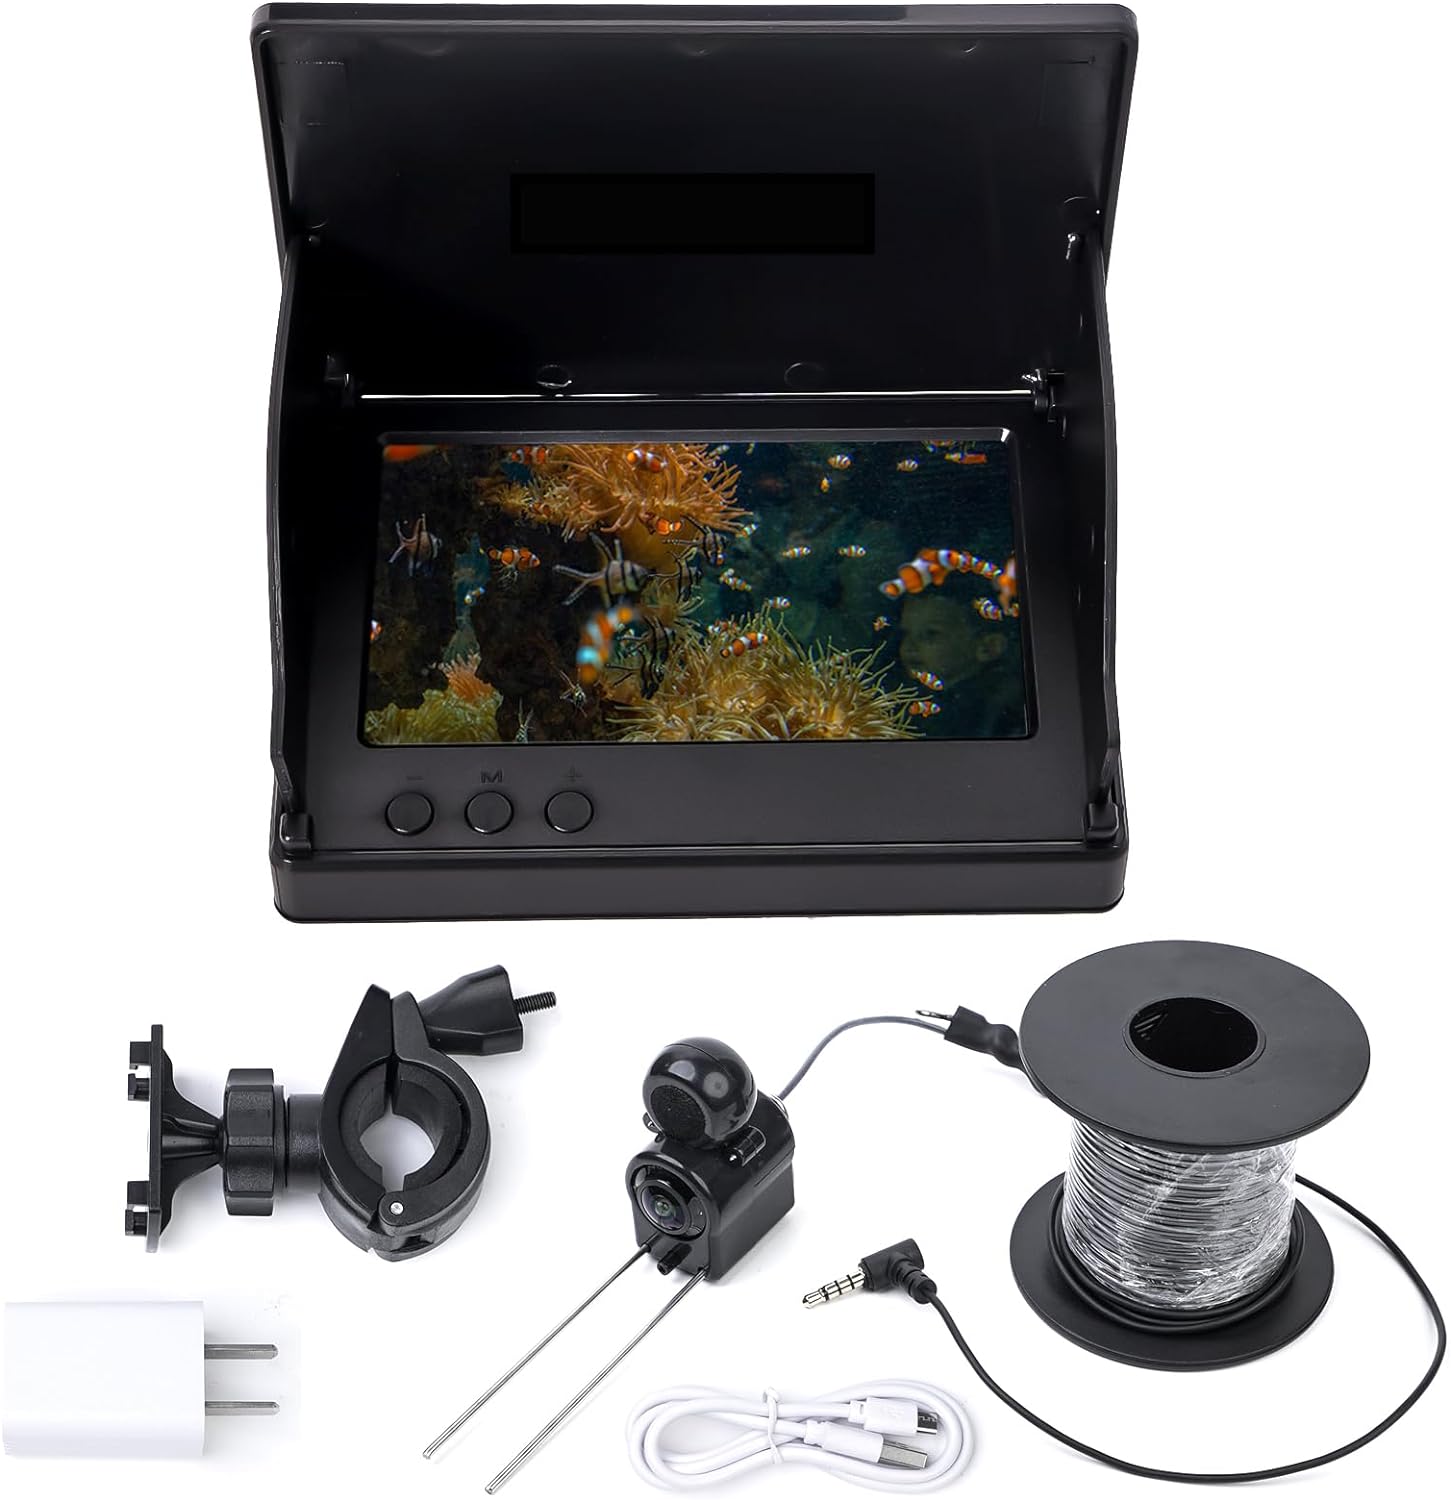 EIOUp Underwater Camera Viewing System – Advanced Under Water Fish Camera with HD Large Display – Underwater Fishing Camera with Infrared Night Vision – Kayak Fishing – Ice Fishing Gear – Easy to use